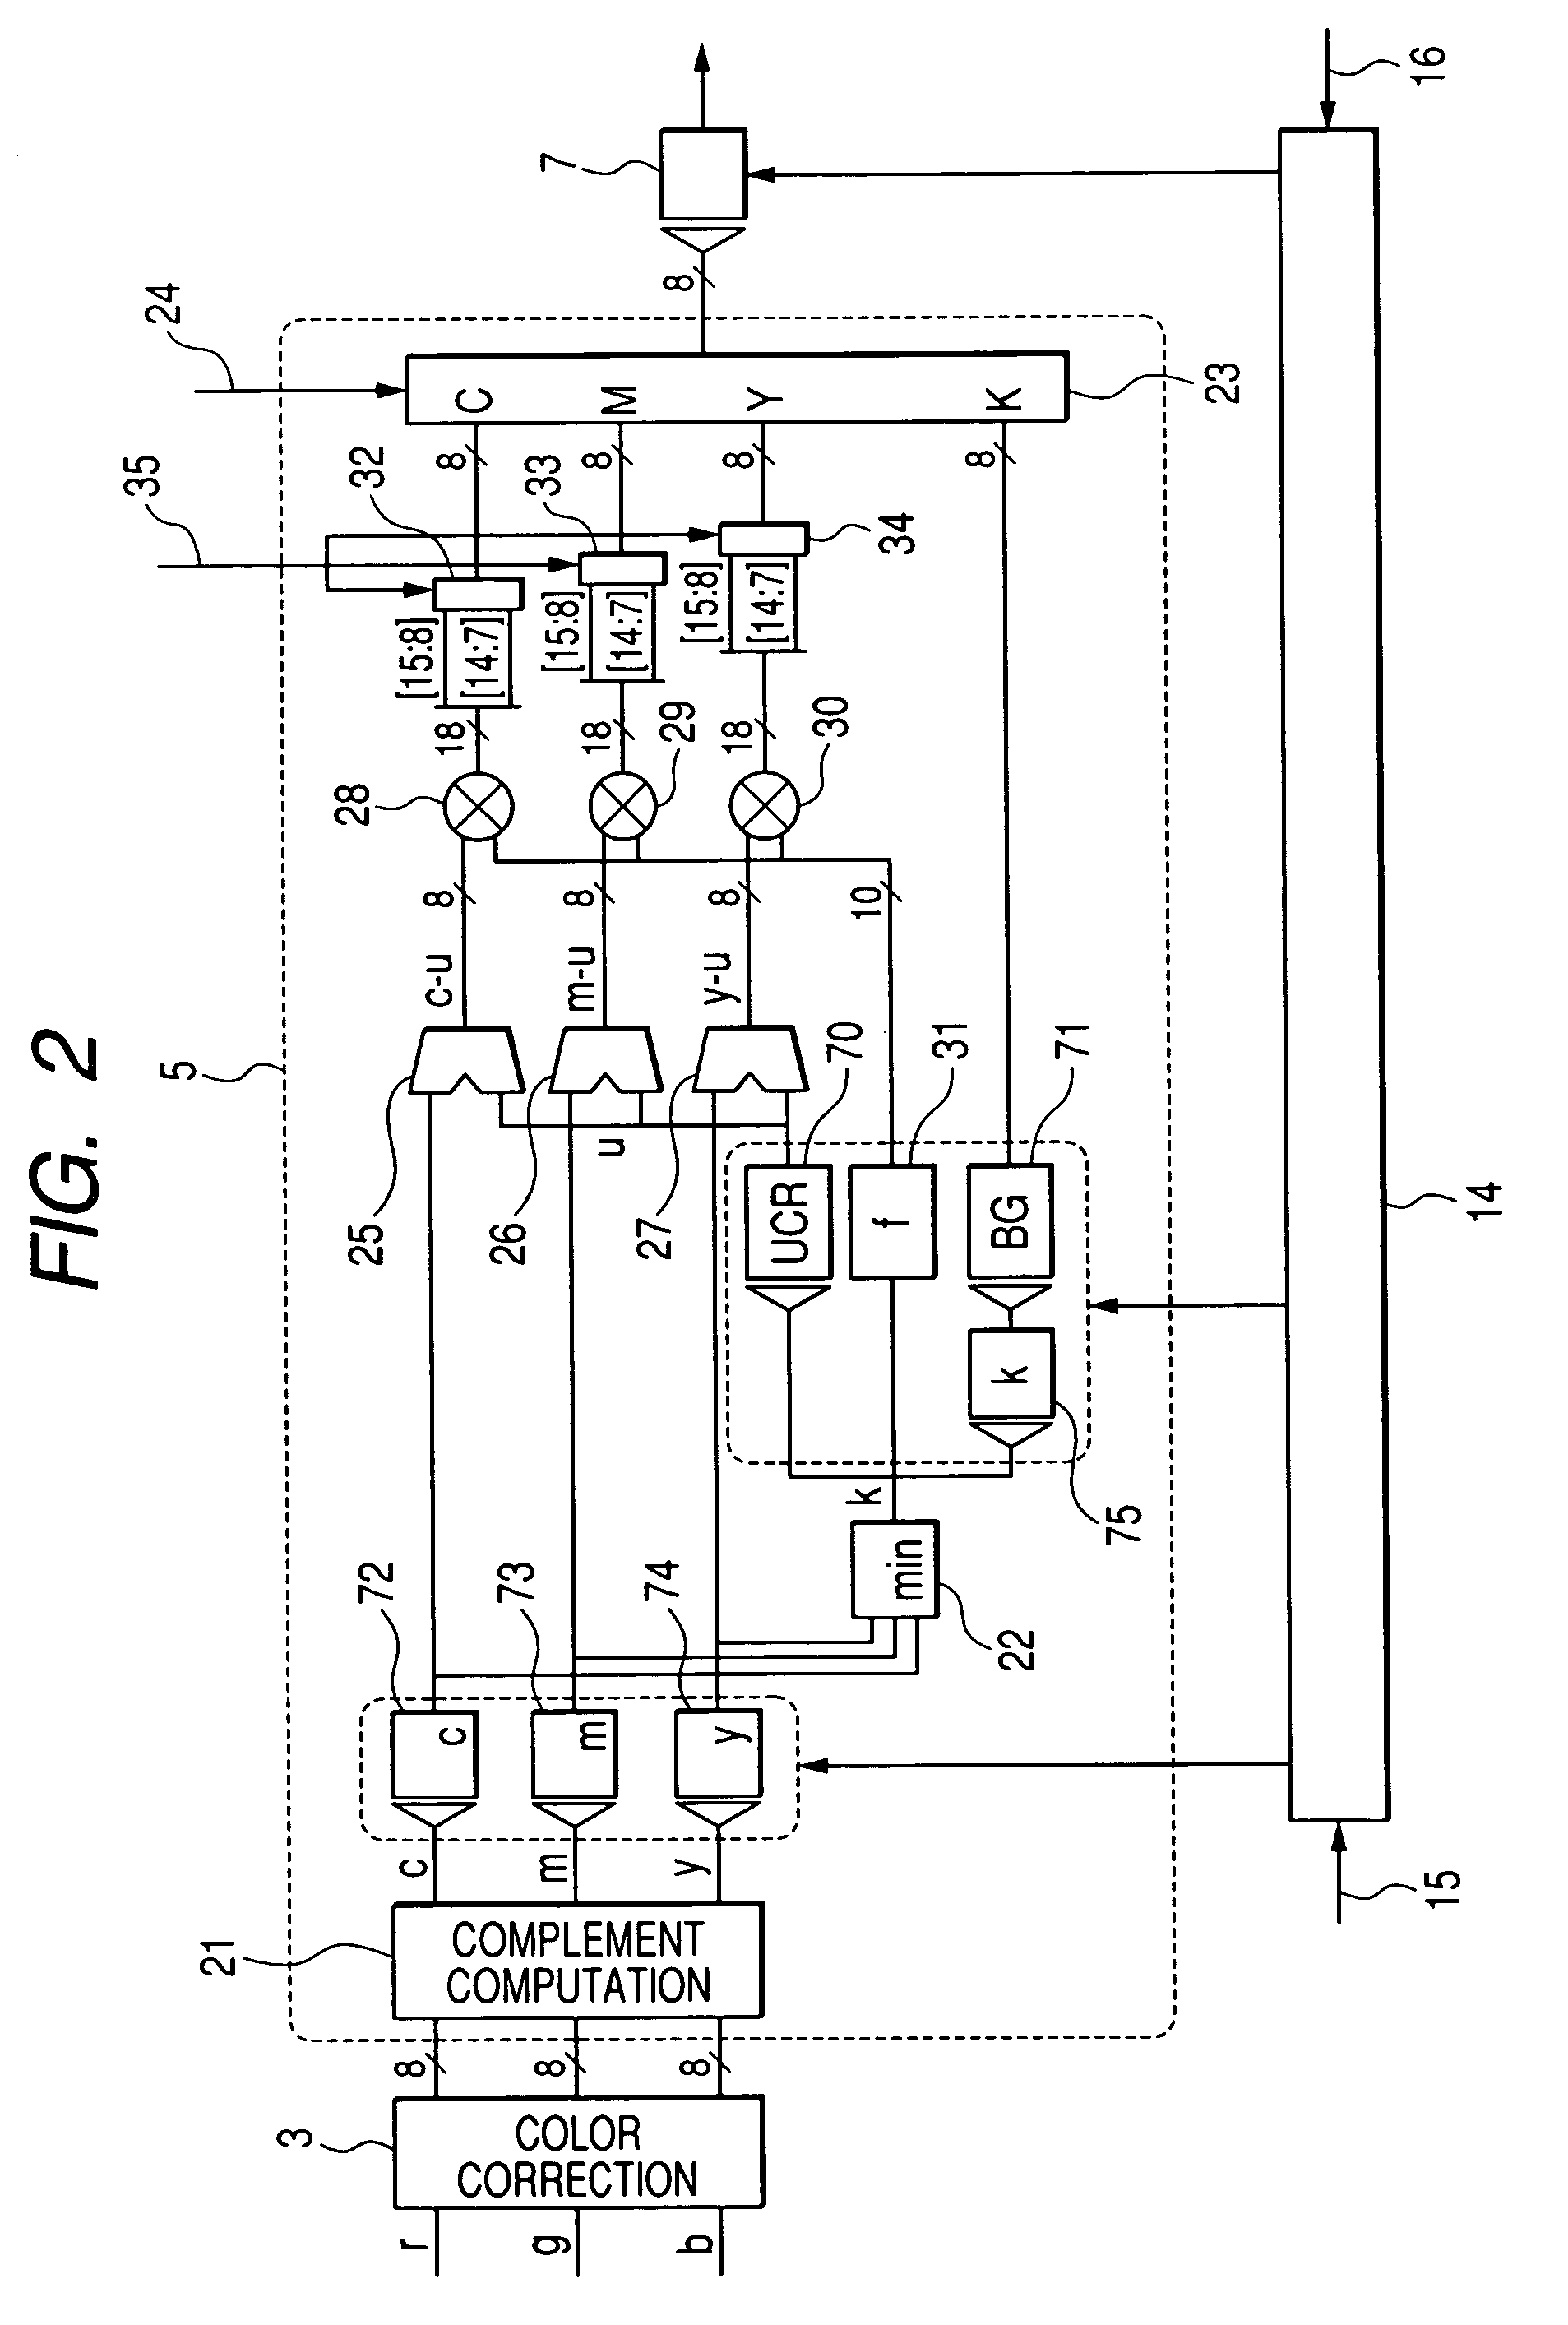 Color image processing apparatus and color printer system